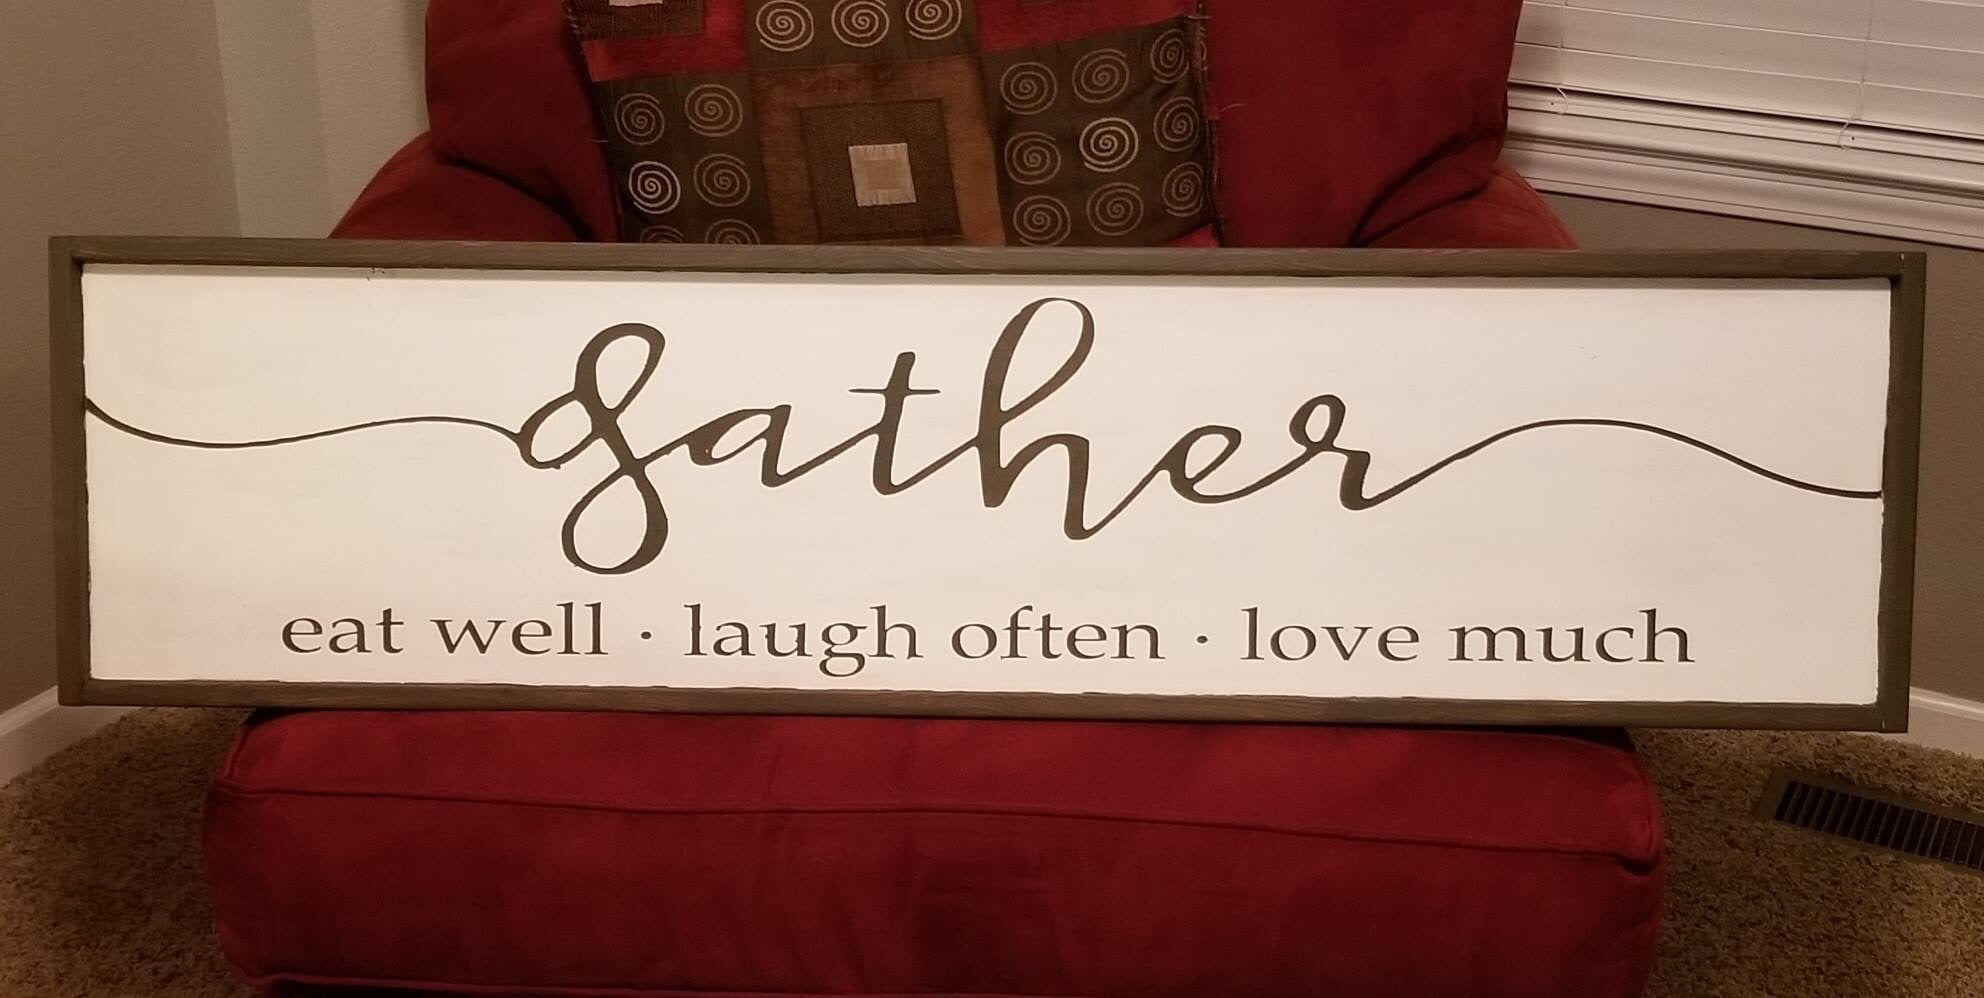 Gather eat well laugh often love much